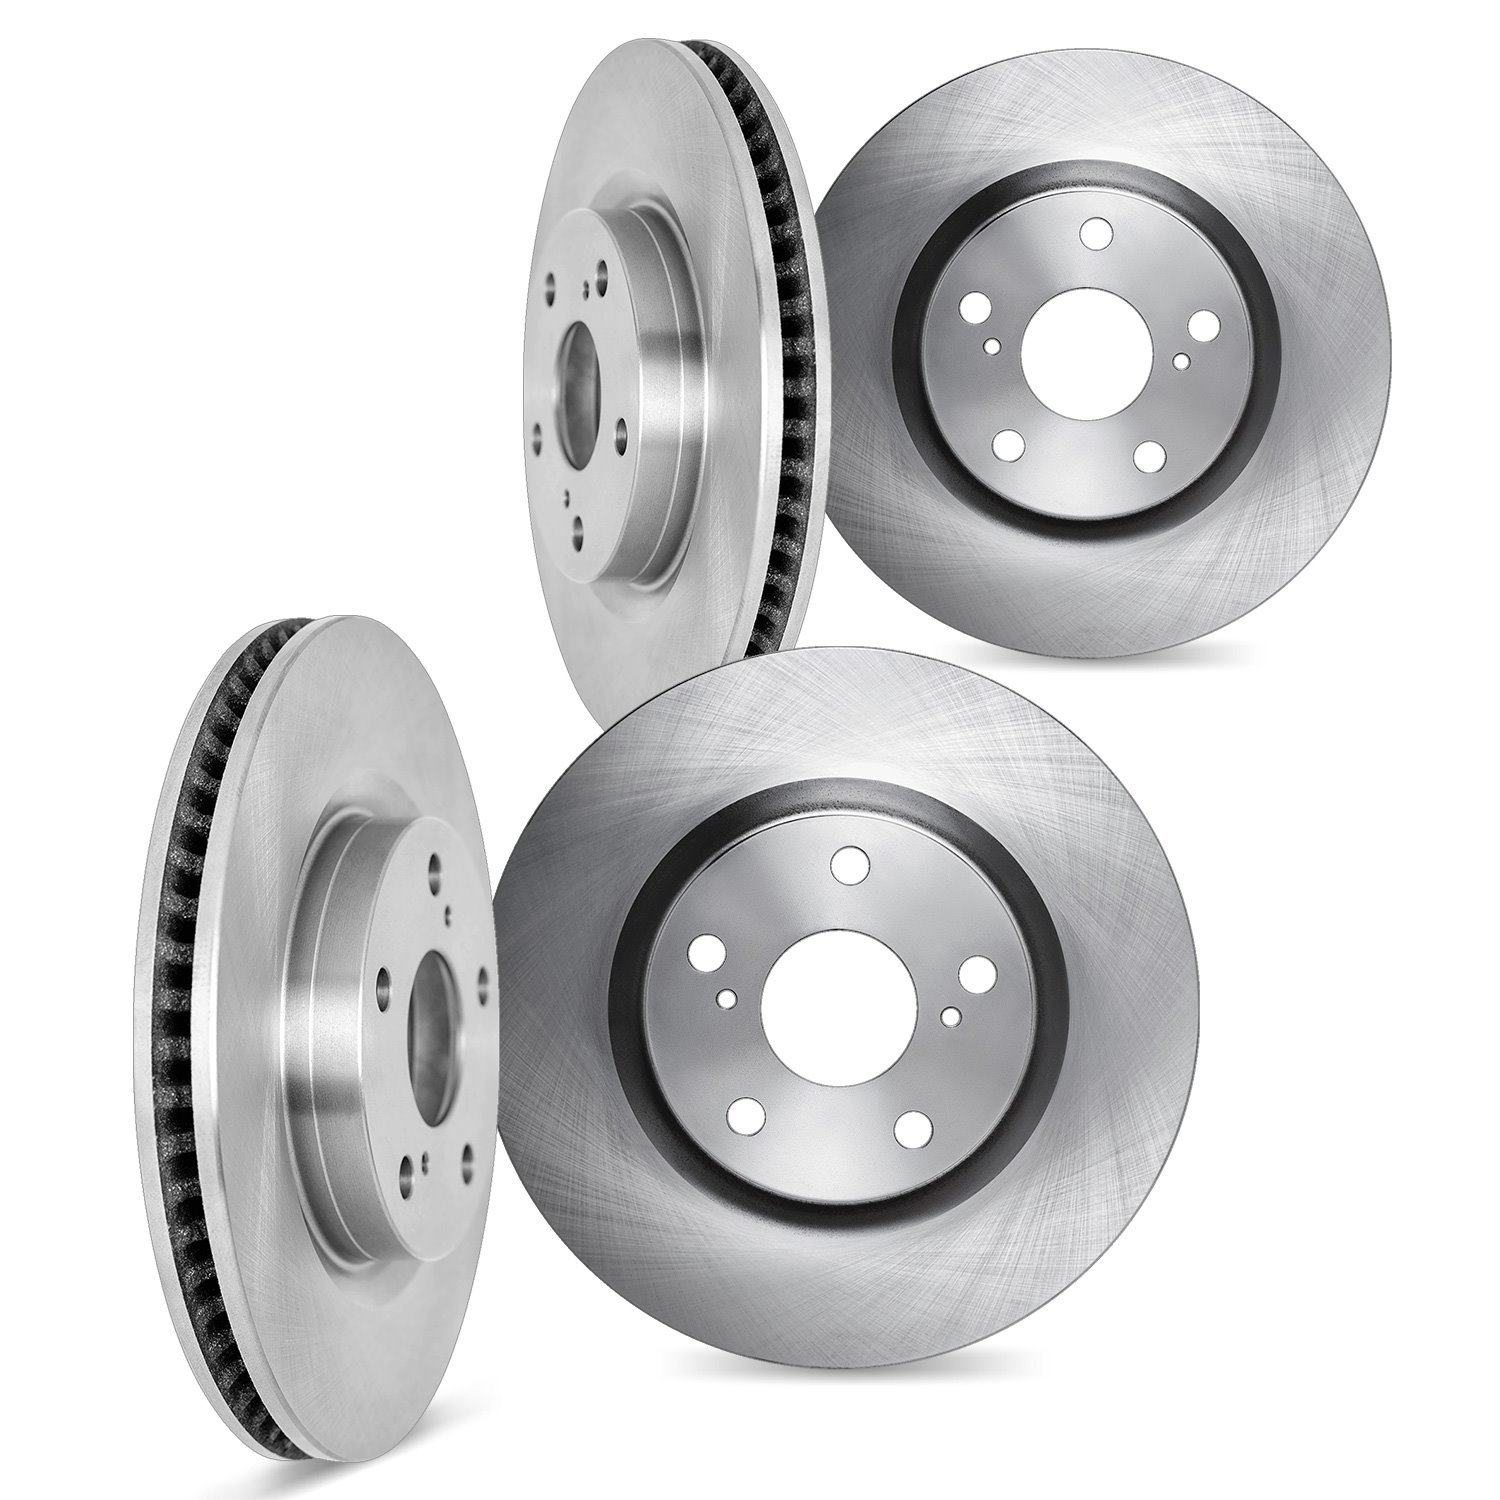 6004-42004 Brake Rotors, Fits Select Mopar, Position: Front and Rear